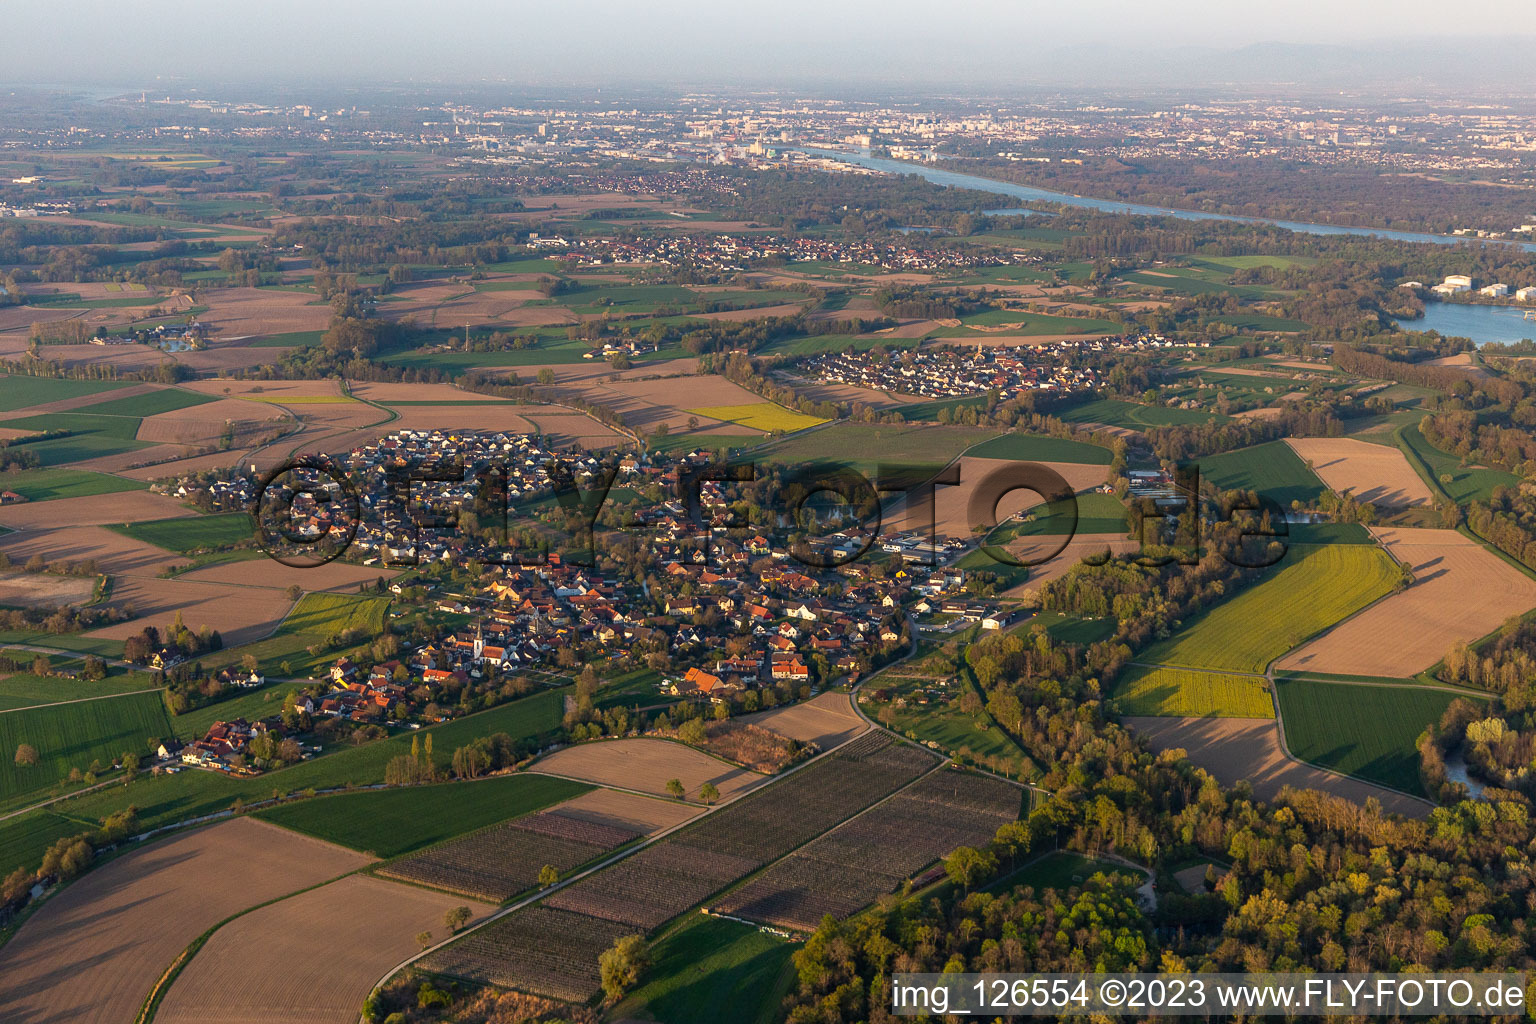 Aerial view of Village on the river bank areas of the Rhine river in Diersheim in the state Baden-Wurttemberg, Germany